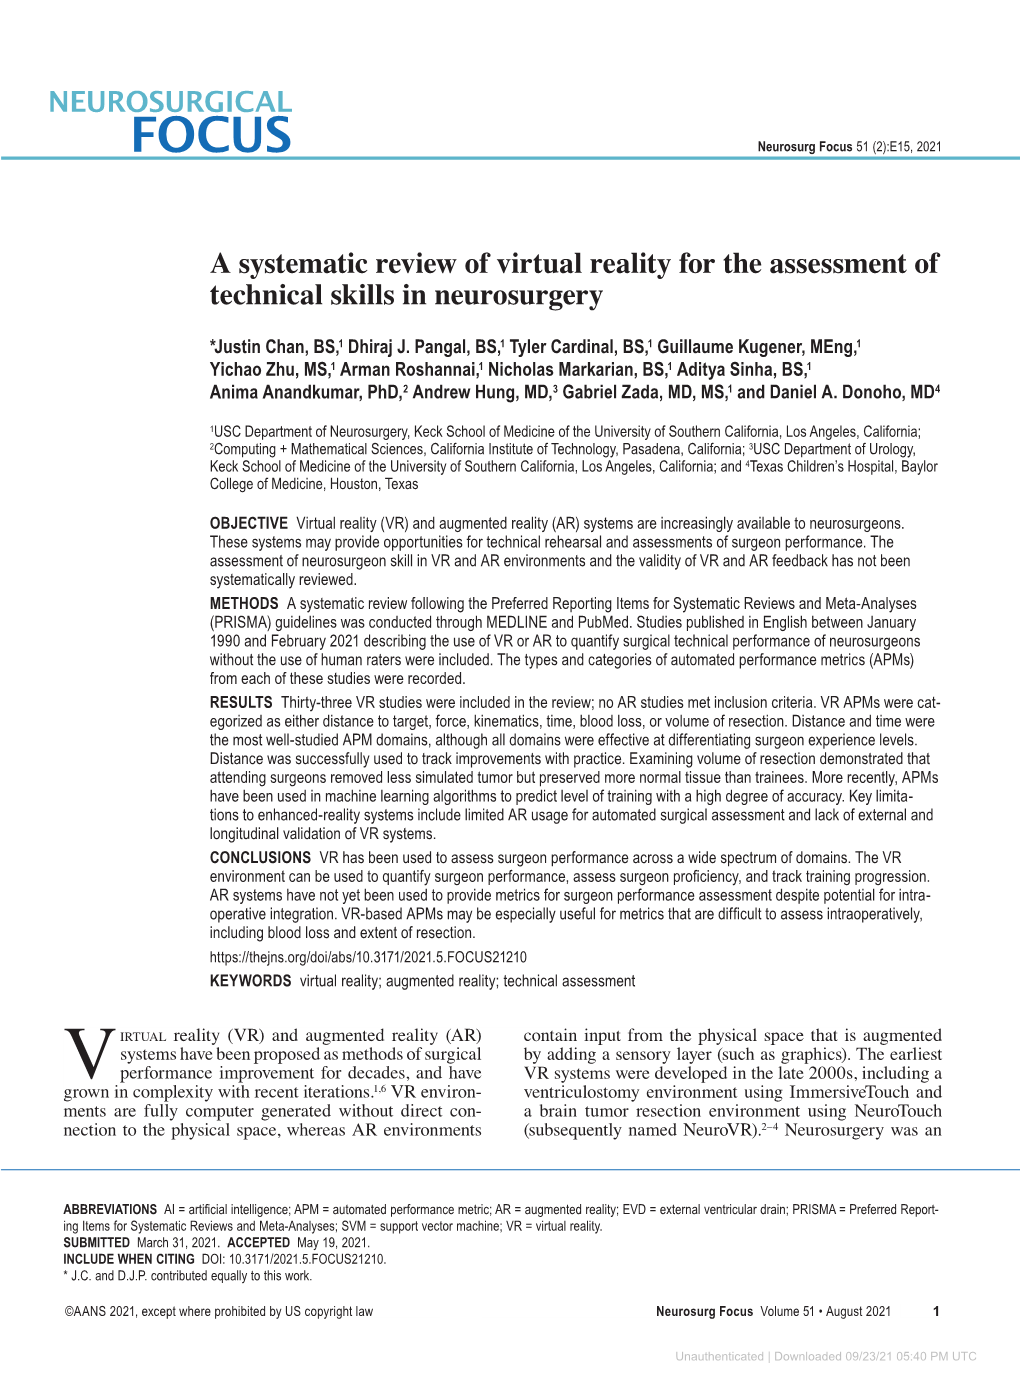 A Systematic Review of Virtual Reality for the Assessment of Technical Skills in Neurosurgery